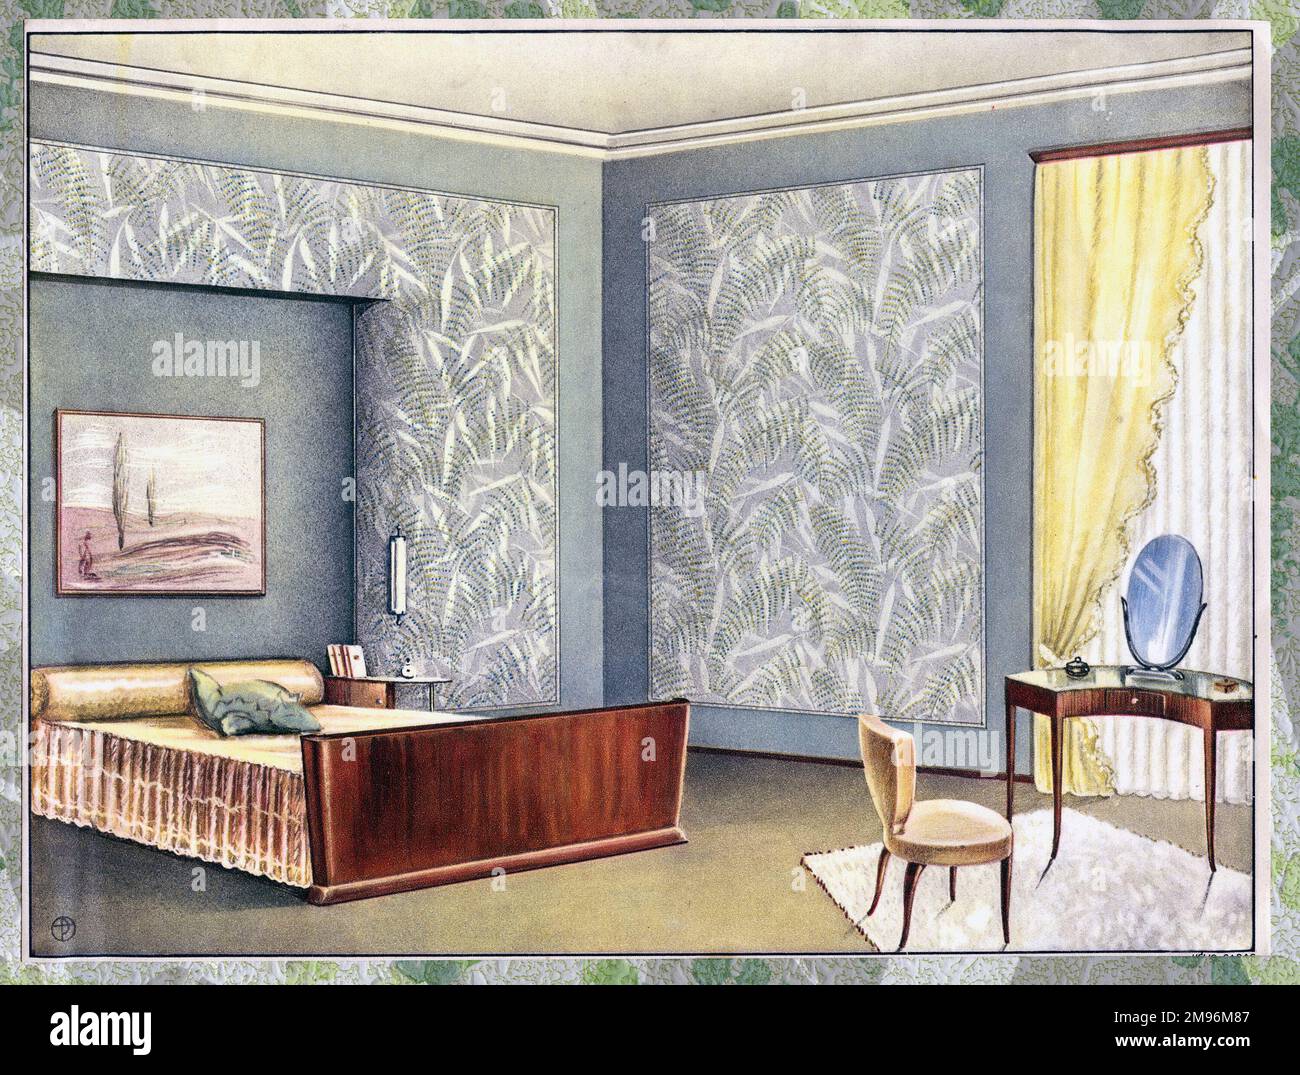 Wallpaper designs shown in a sample bedroom interior with a bed ...